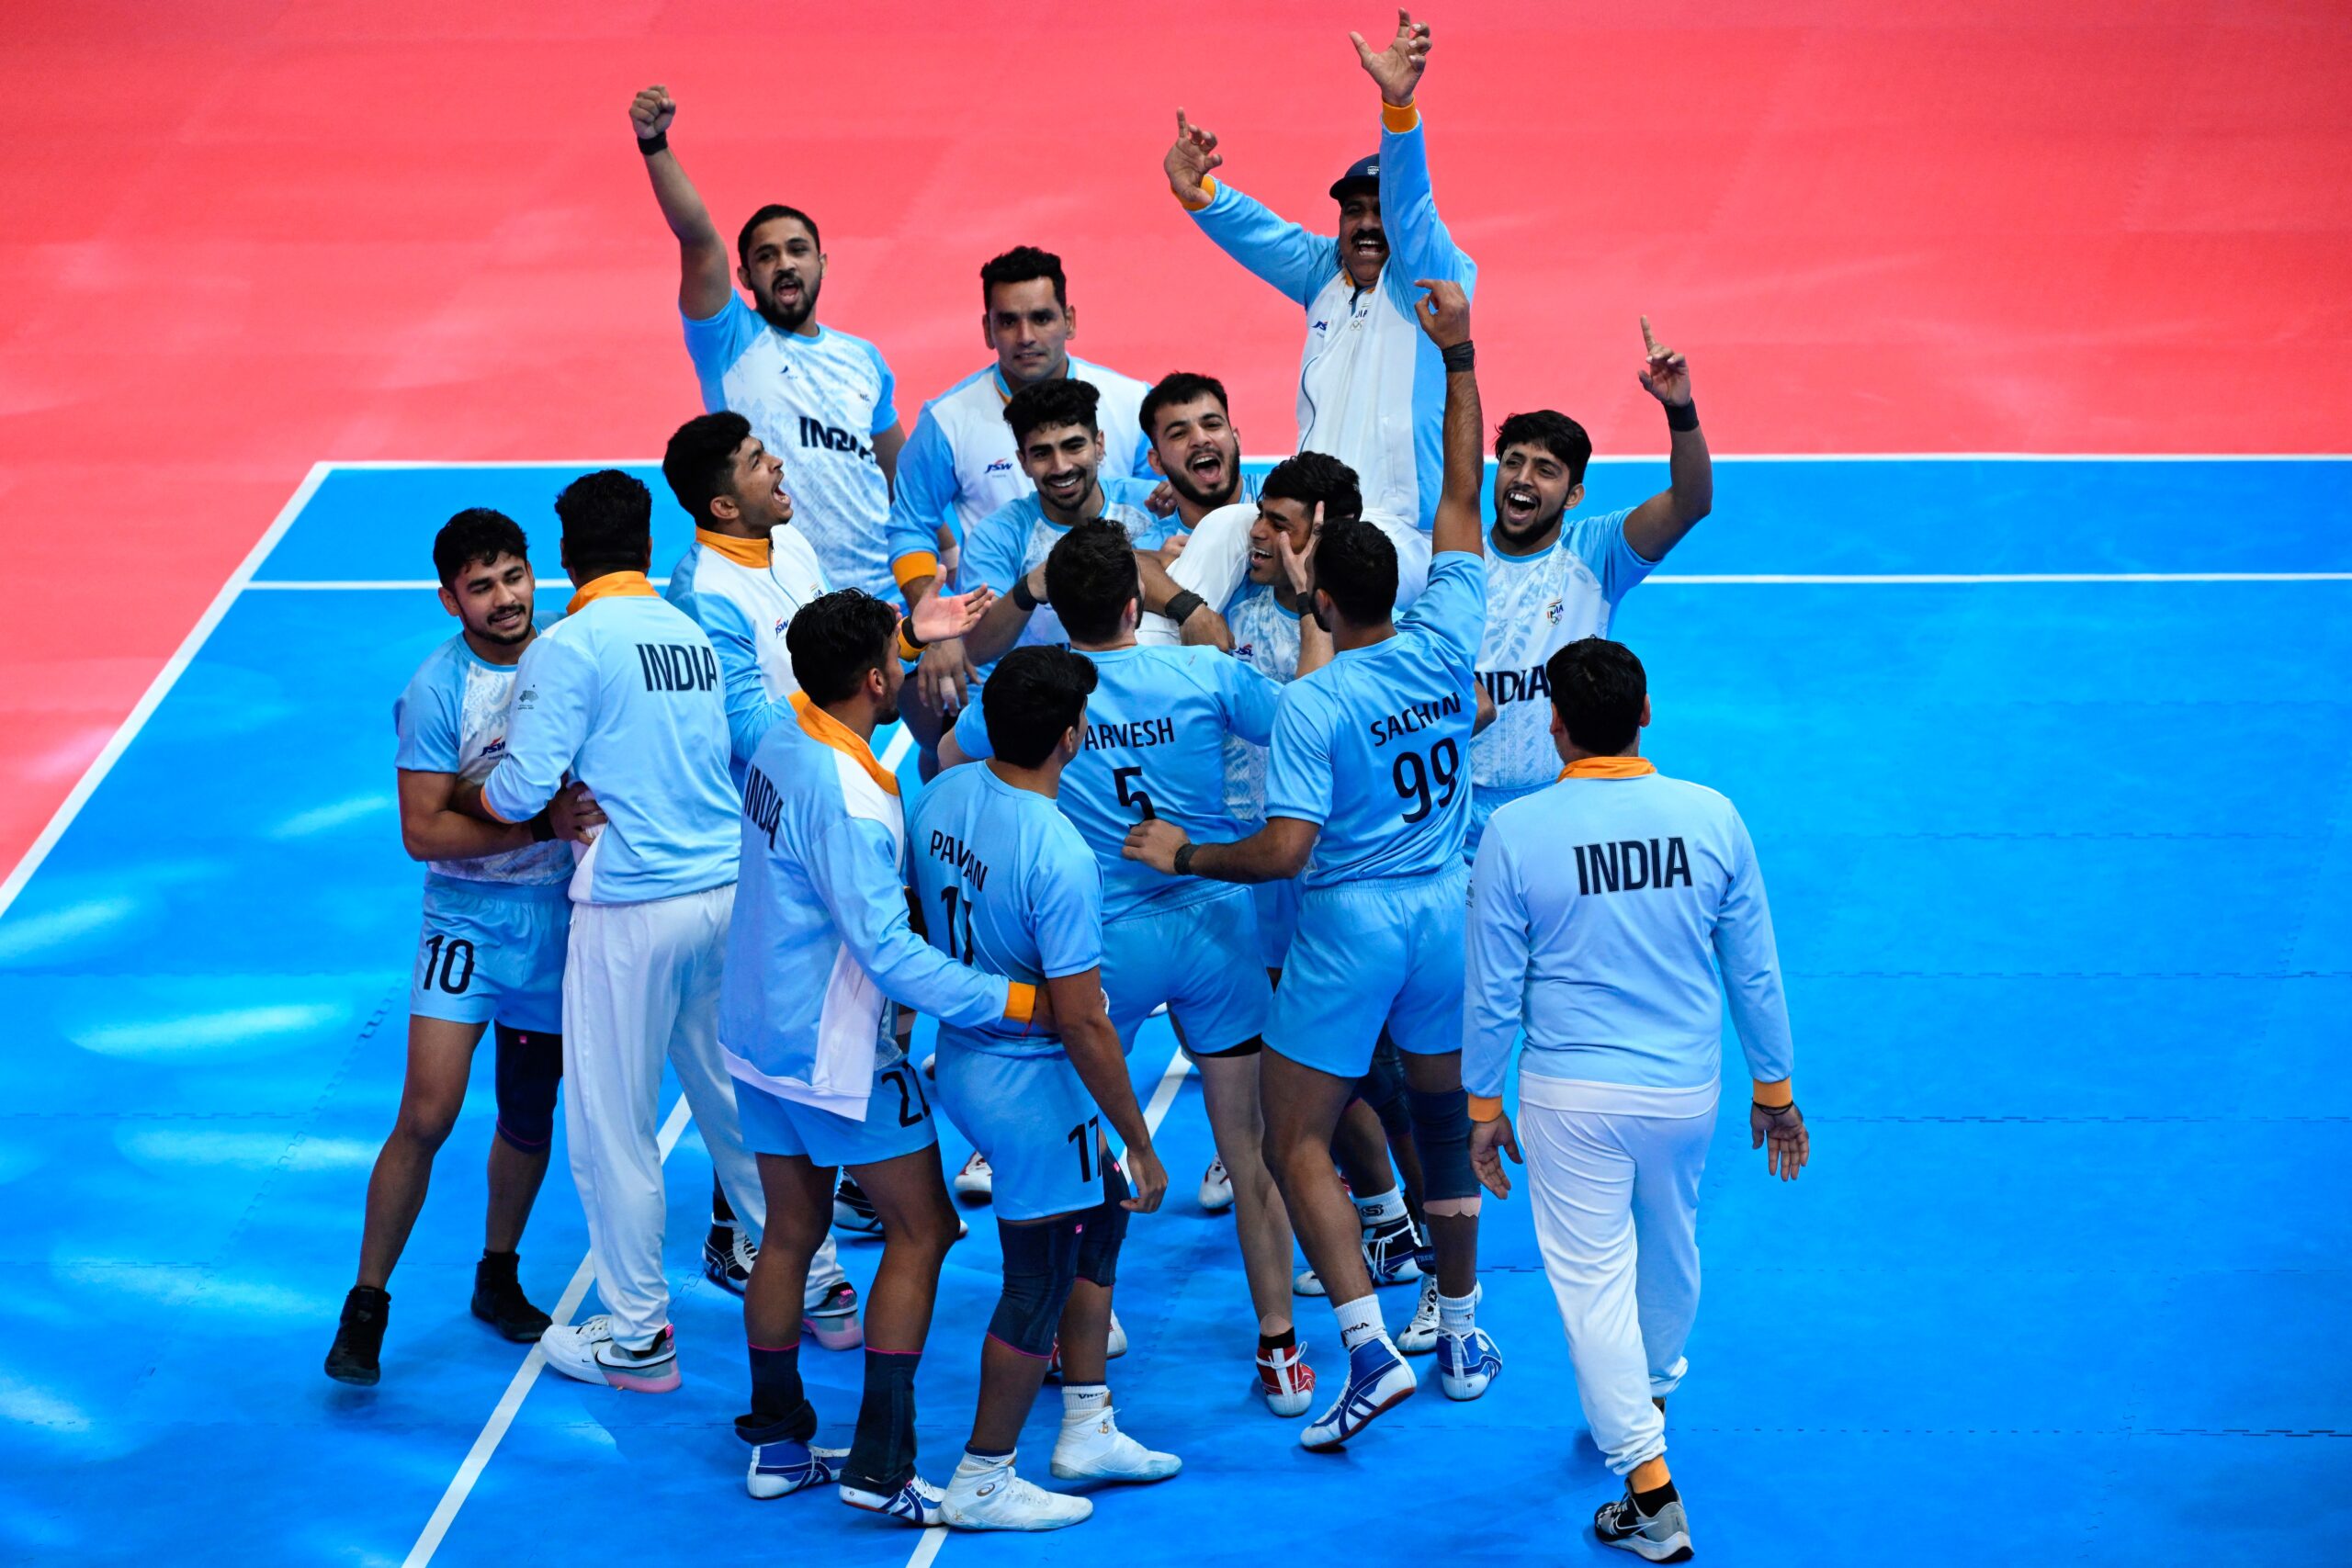 Asian Games 2023 – From 1951 To 2023: India’s Medal Tally In Asian Games Over The Years